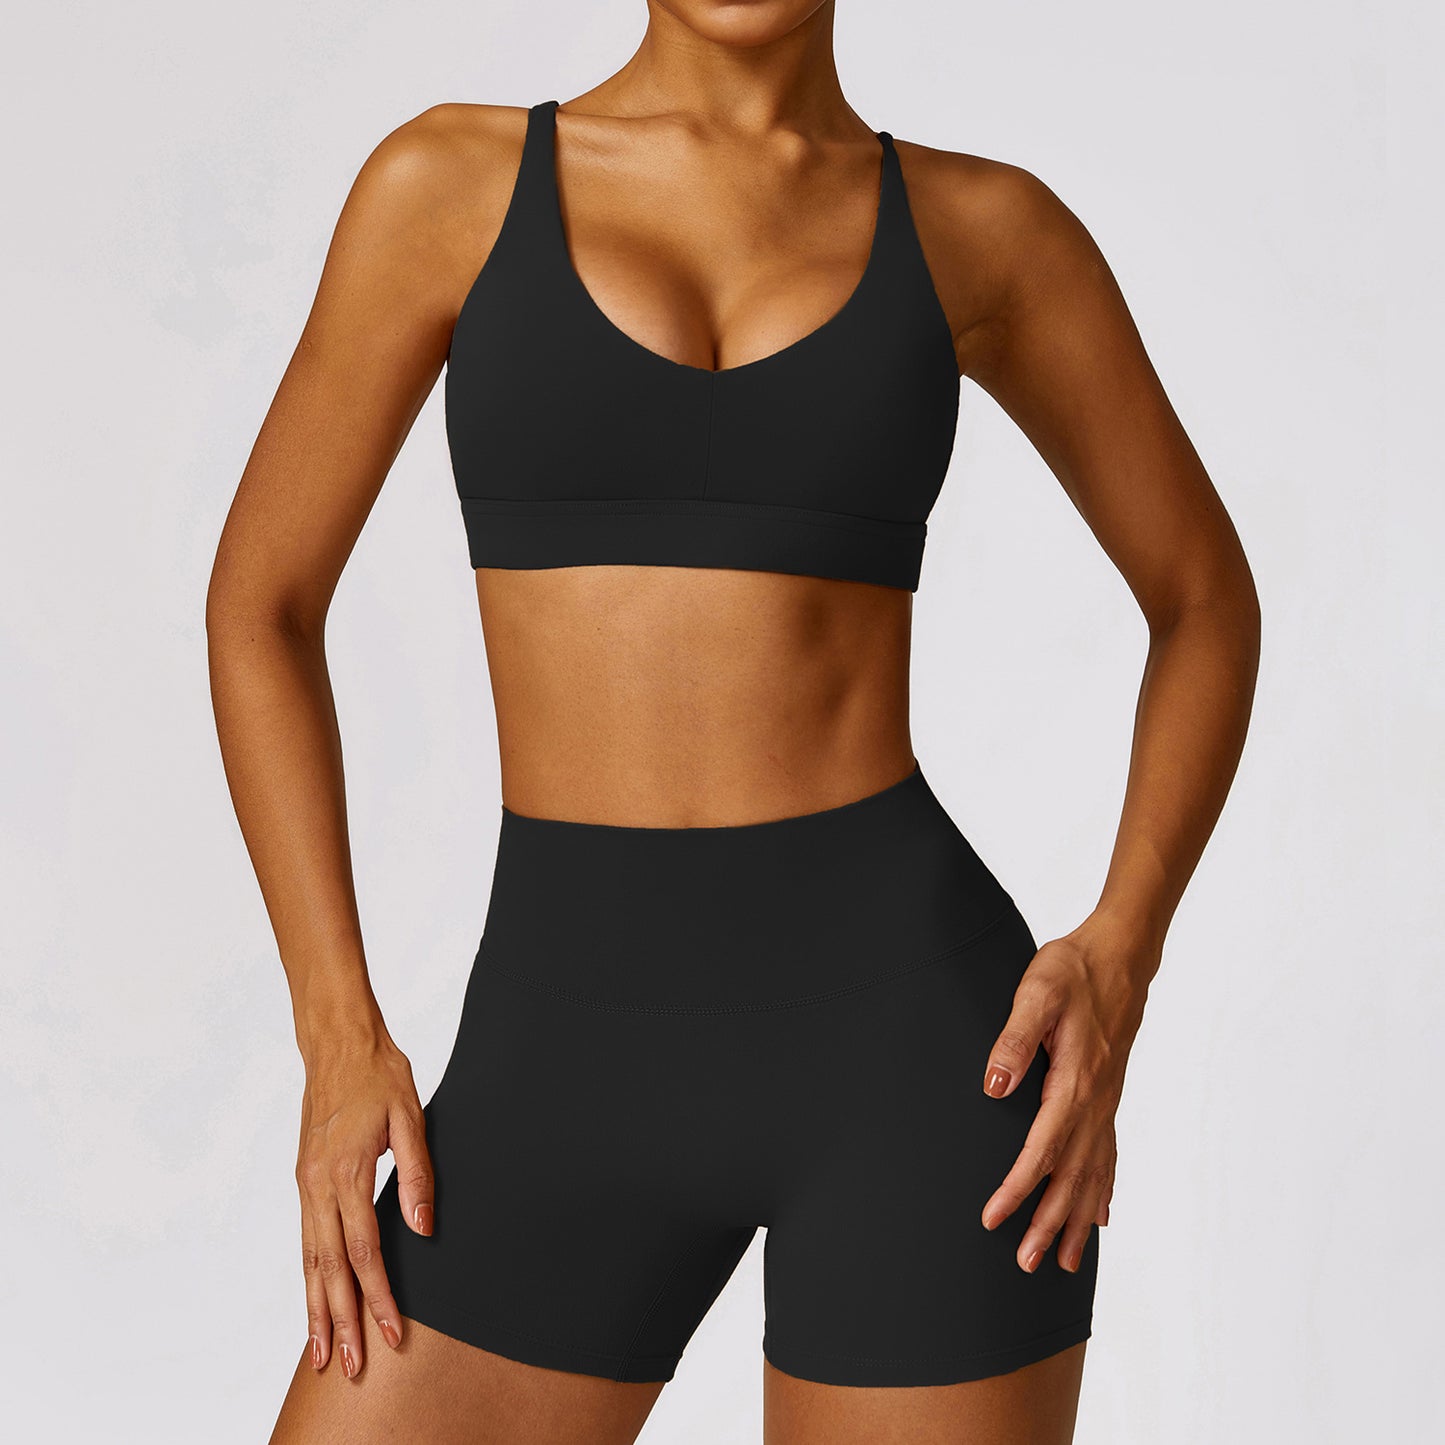 Tight sports set quick-drying running fitness wear 8552 5 colors